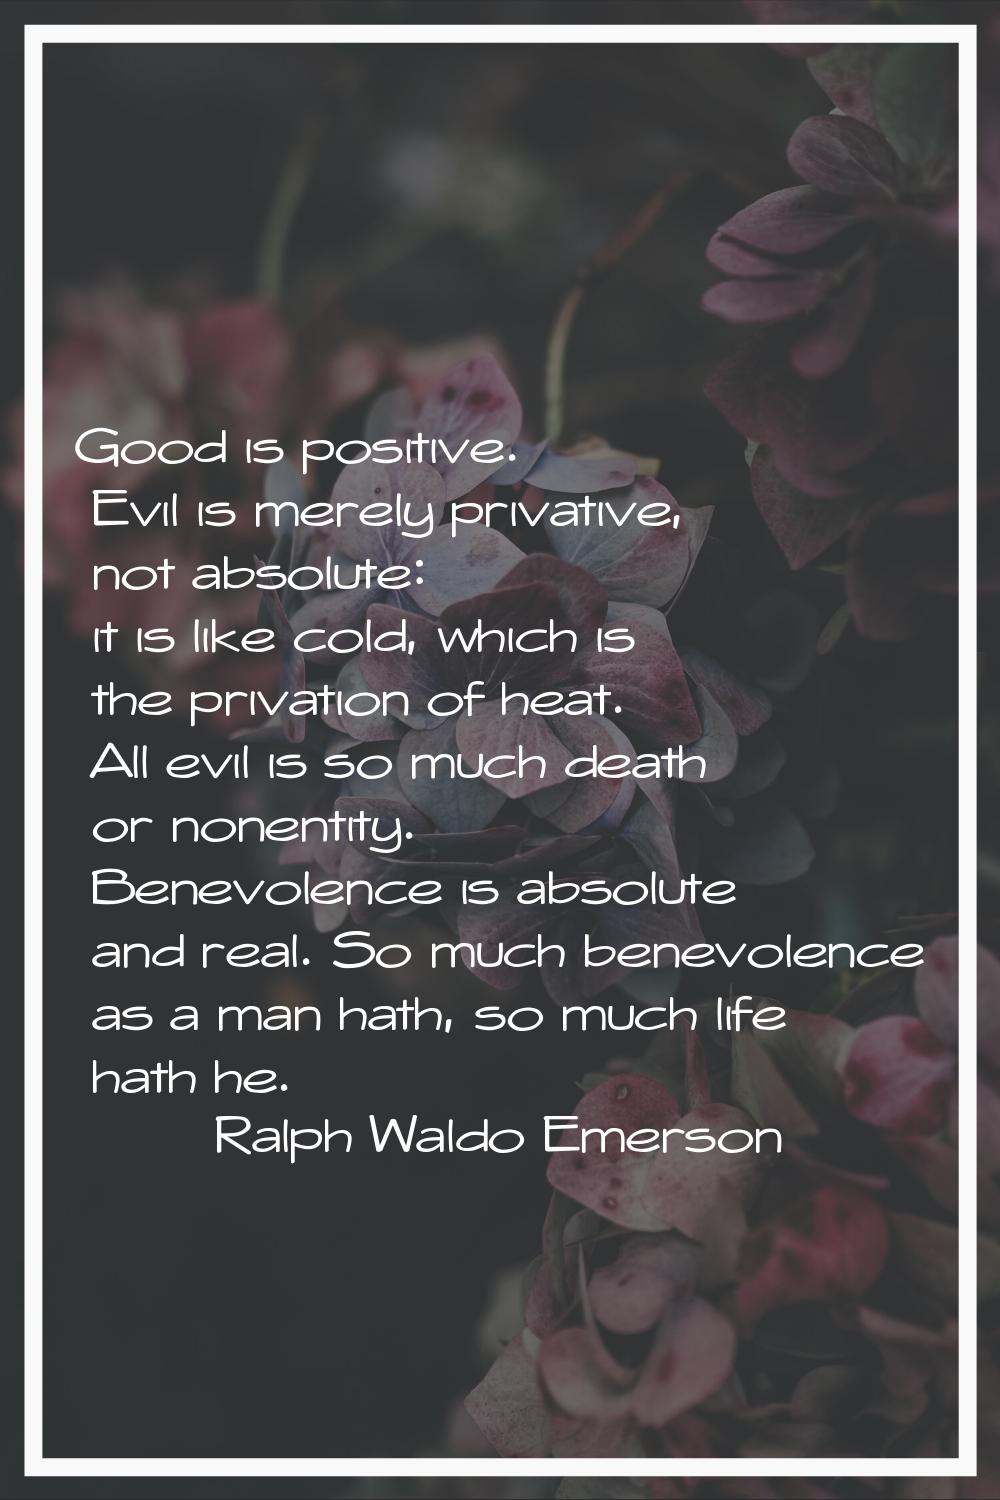 Good is positive. Evil is merely privative, not absolute: it is like cold, which is the privation o